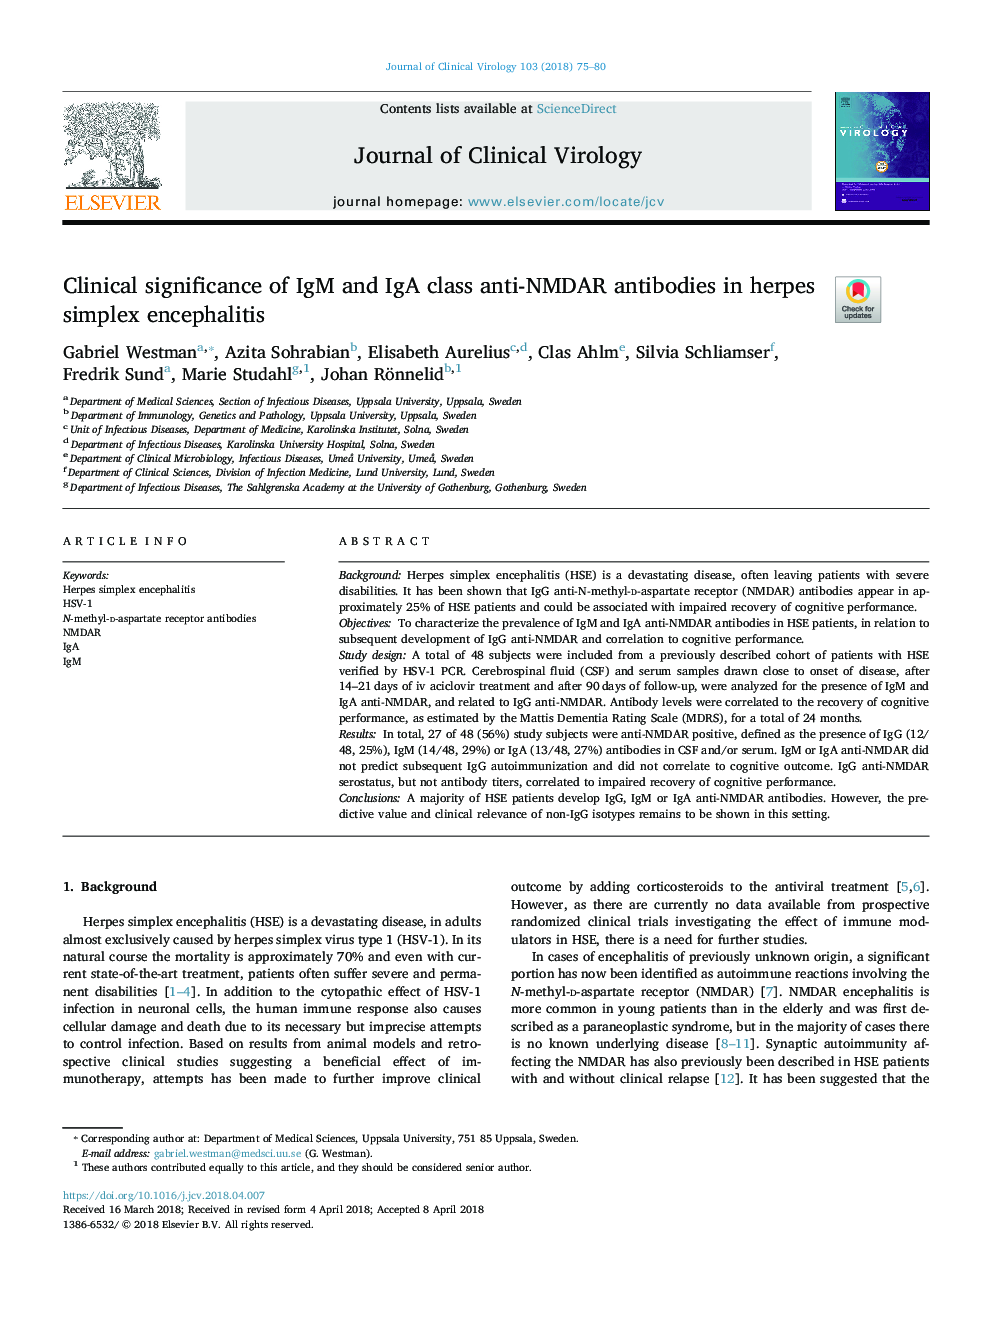 Clinical significance of IgM and IgA class anti-NMDAR antibodies in herpes simplex encephalitis